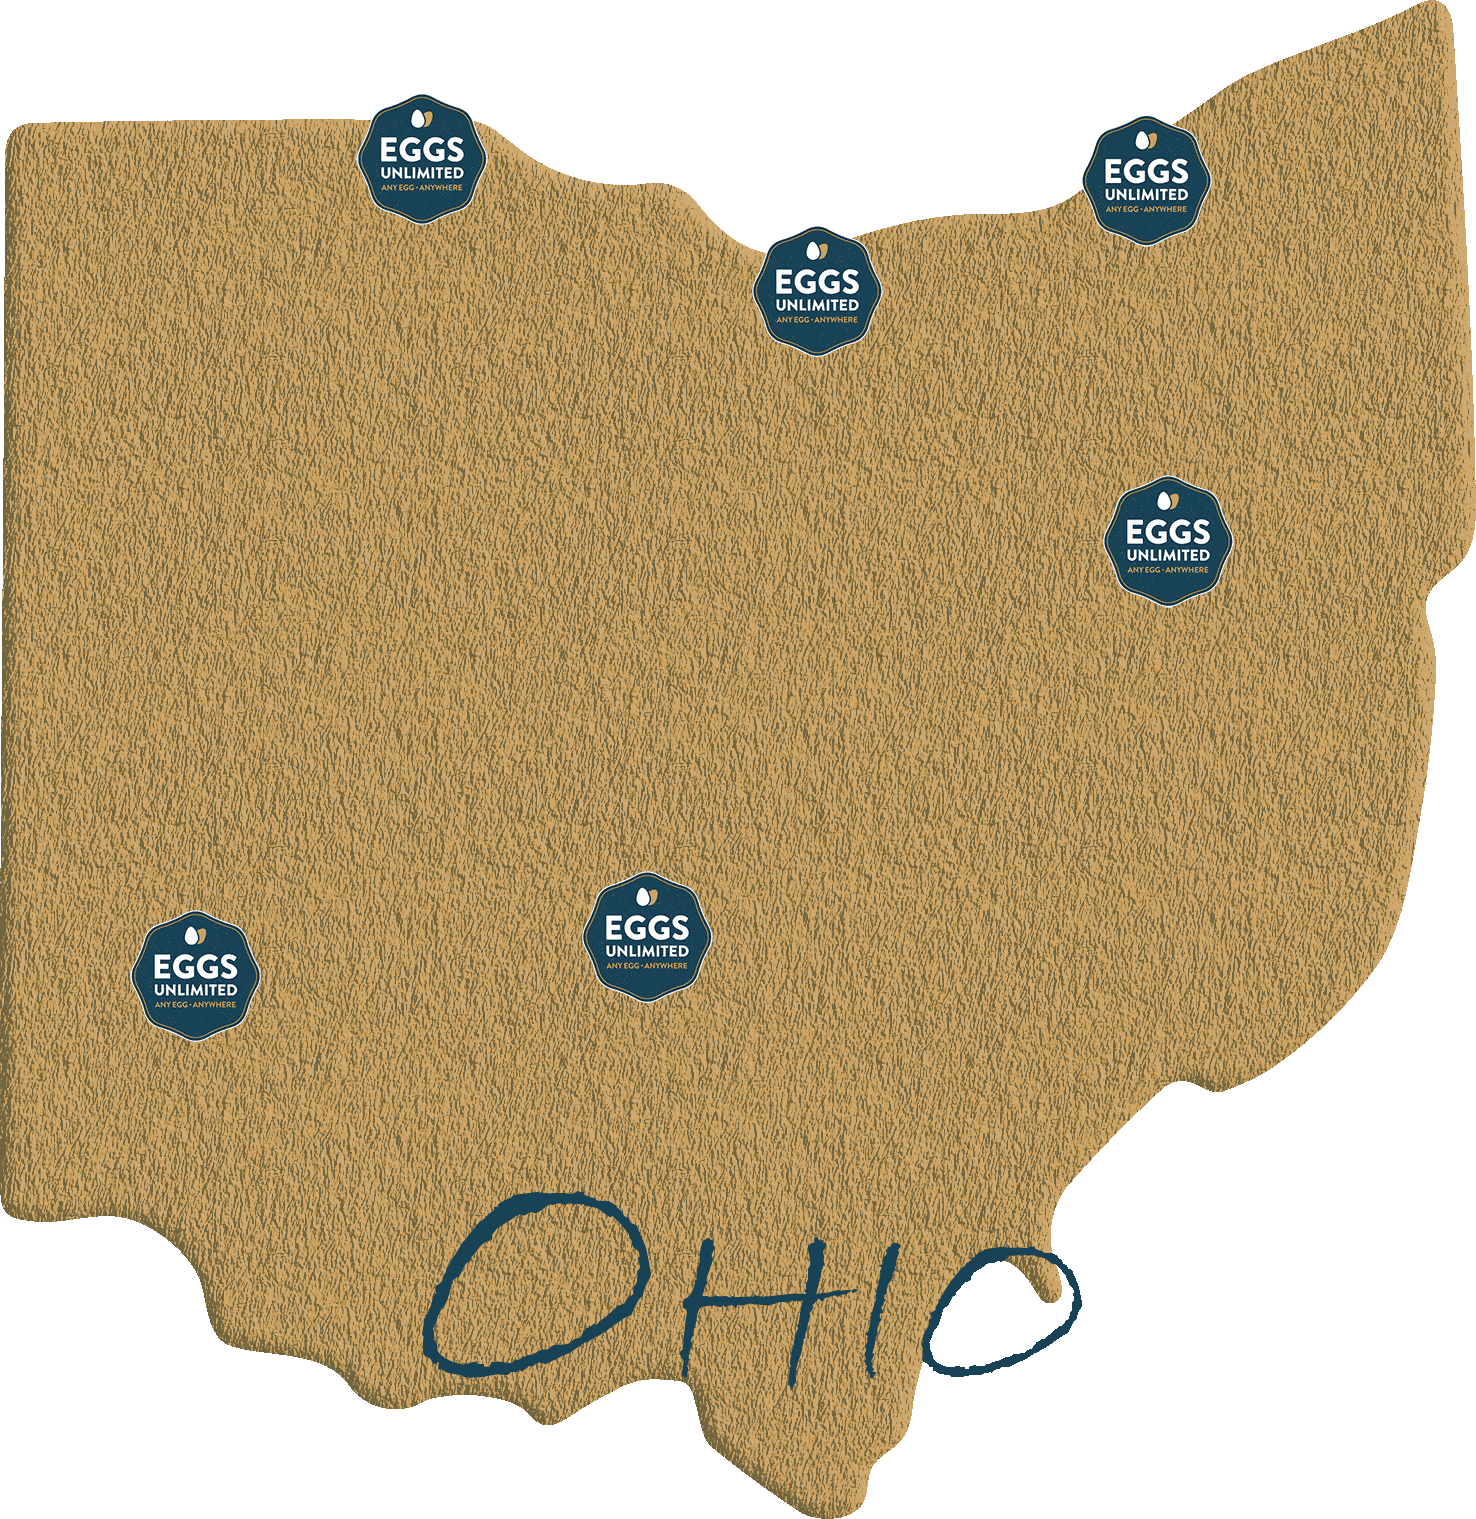 Eggs unlimited is one of the leading eggs suppliers in Ohio this image is the map of eggs in Ohio